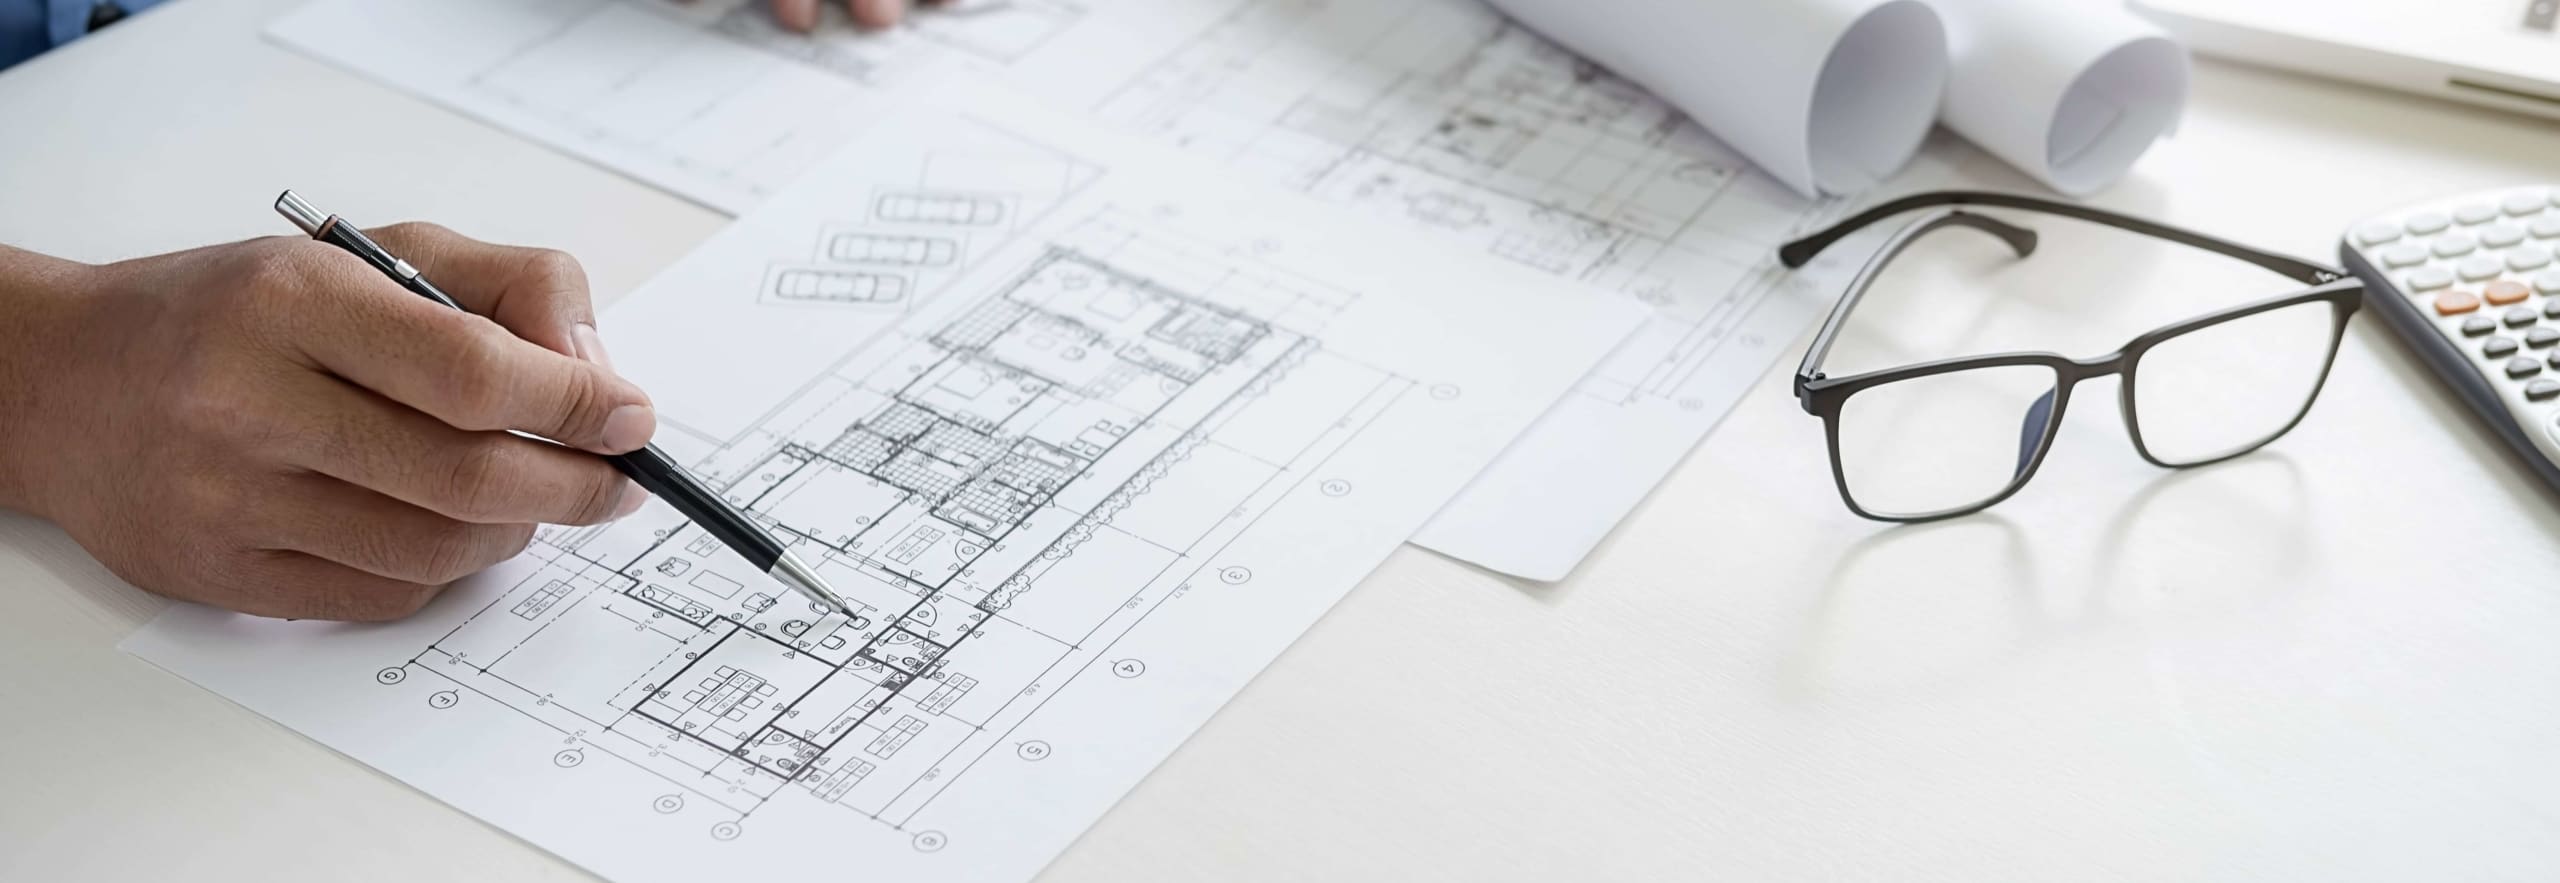 Architect designing blueprints for a historic home restoration project